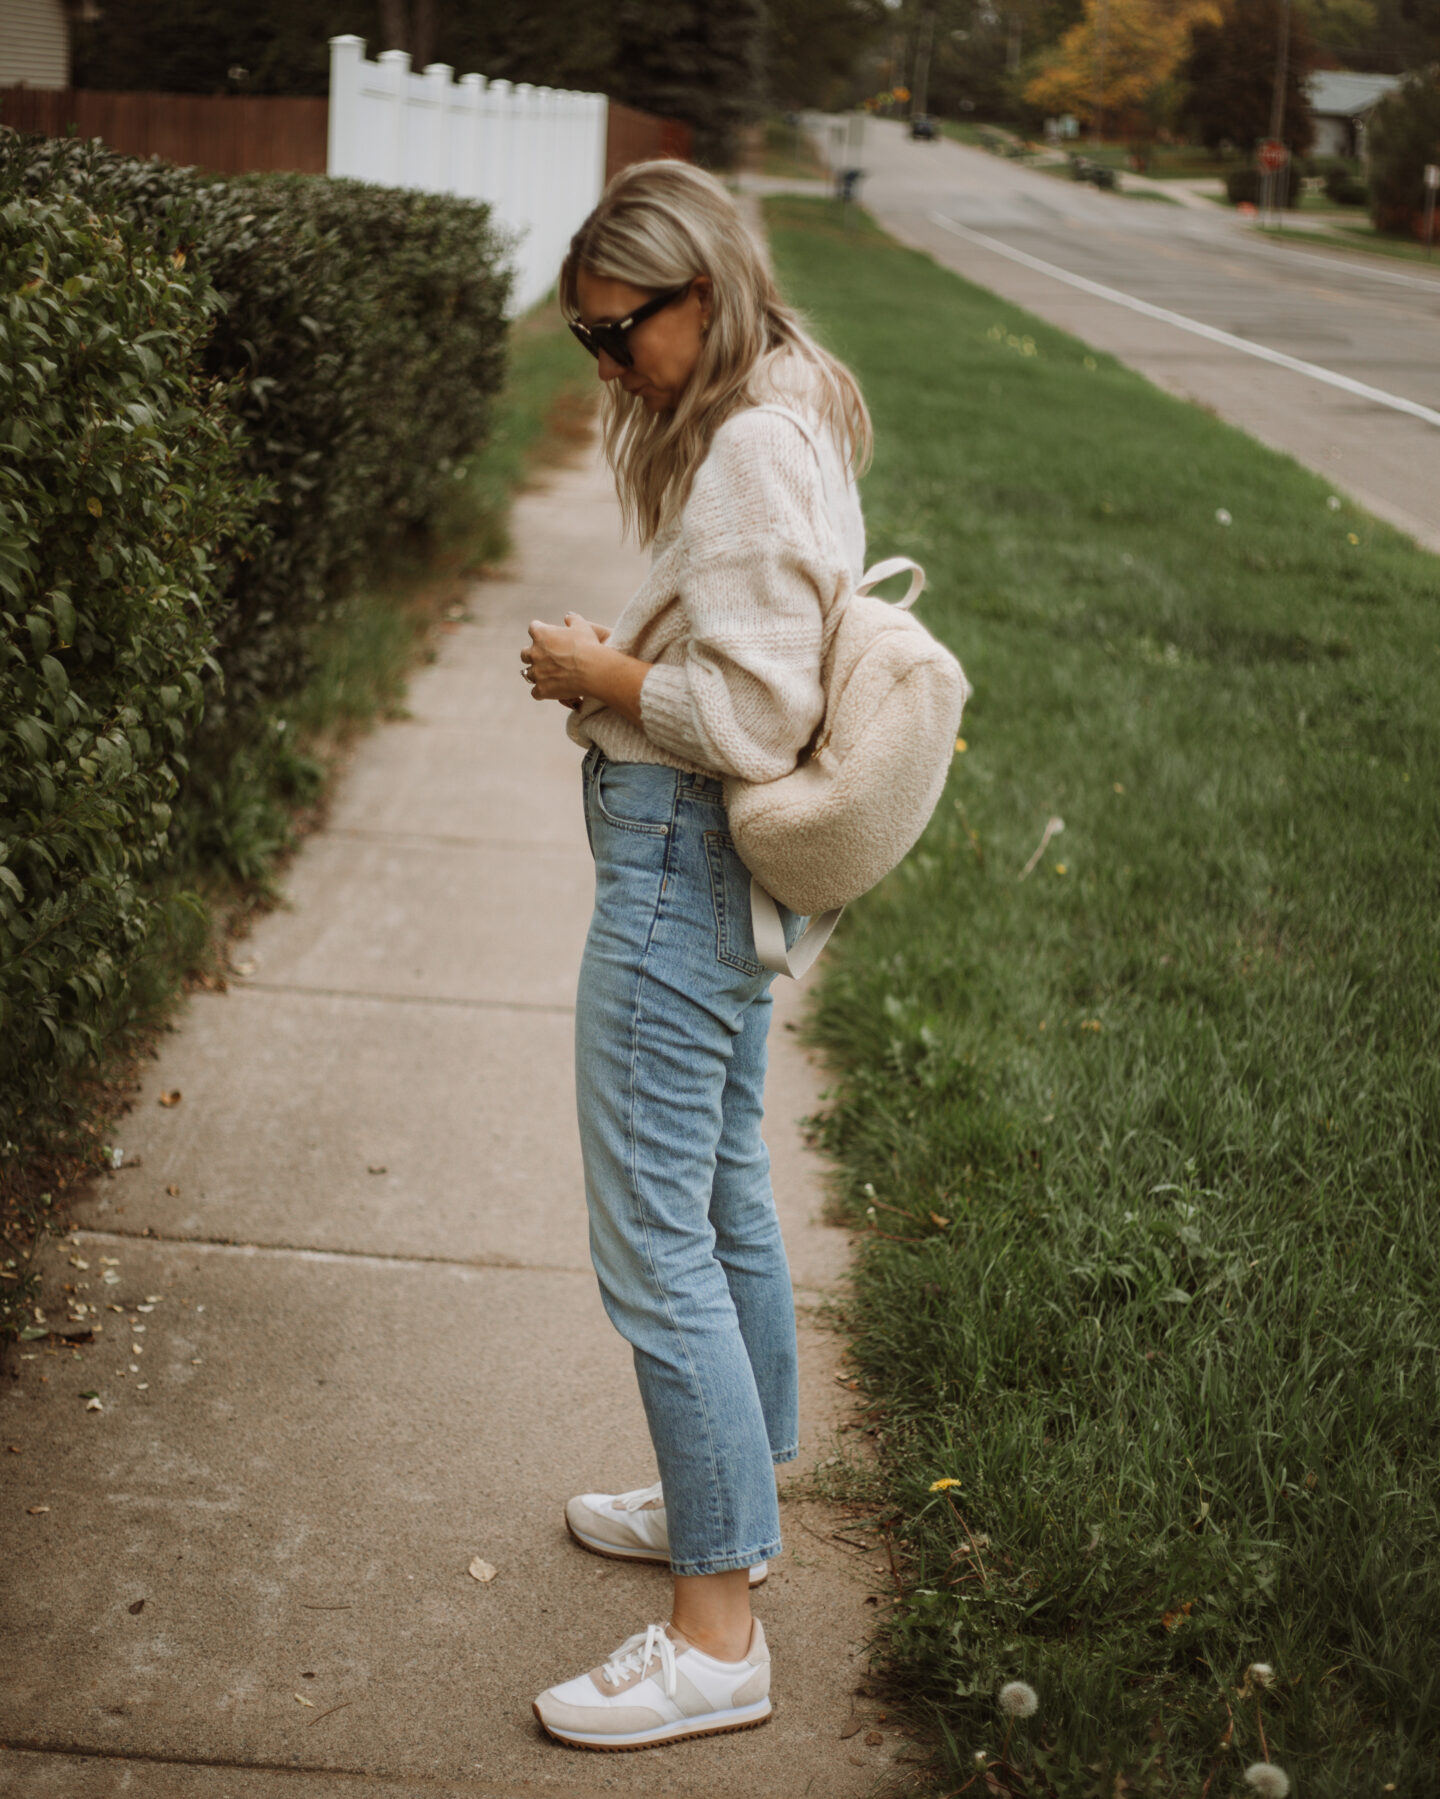 Karin Emily wears the Everlane puff sweater, light wash 90's cheeky jeans, and comfy sneakers